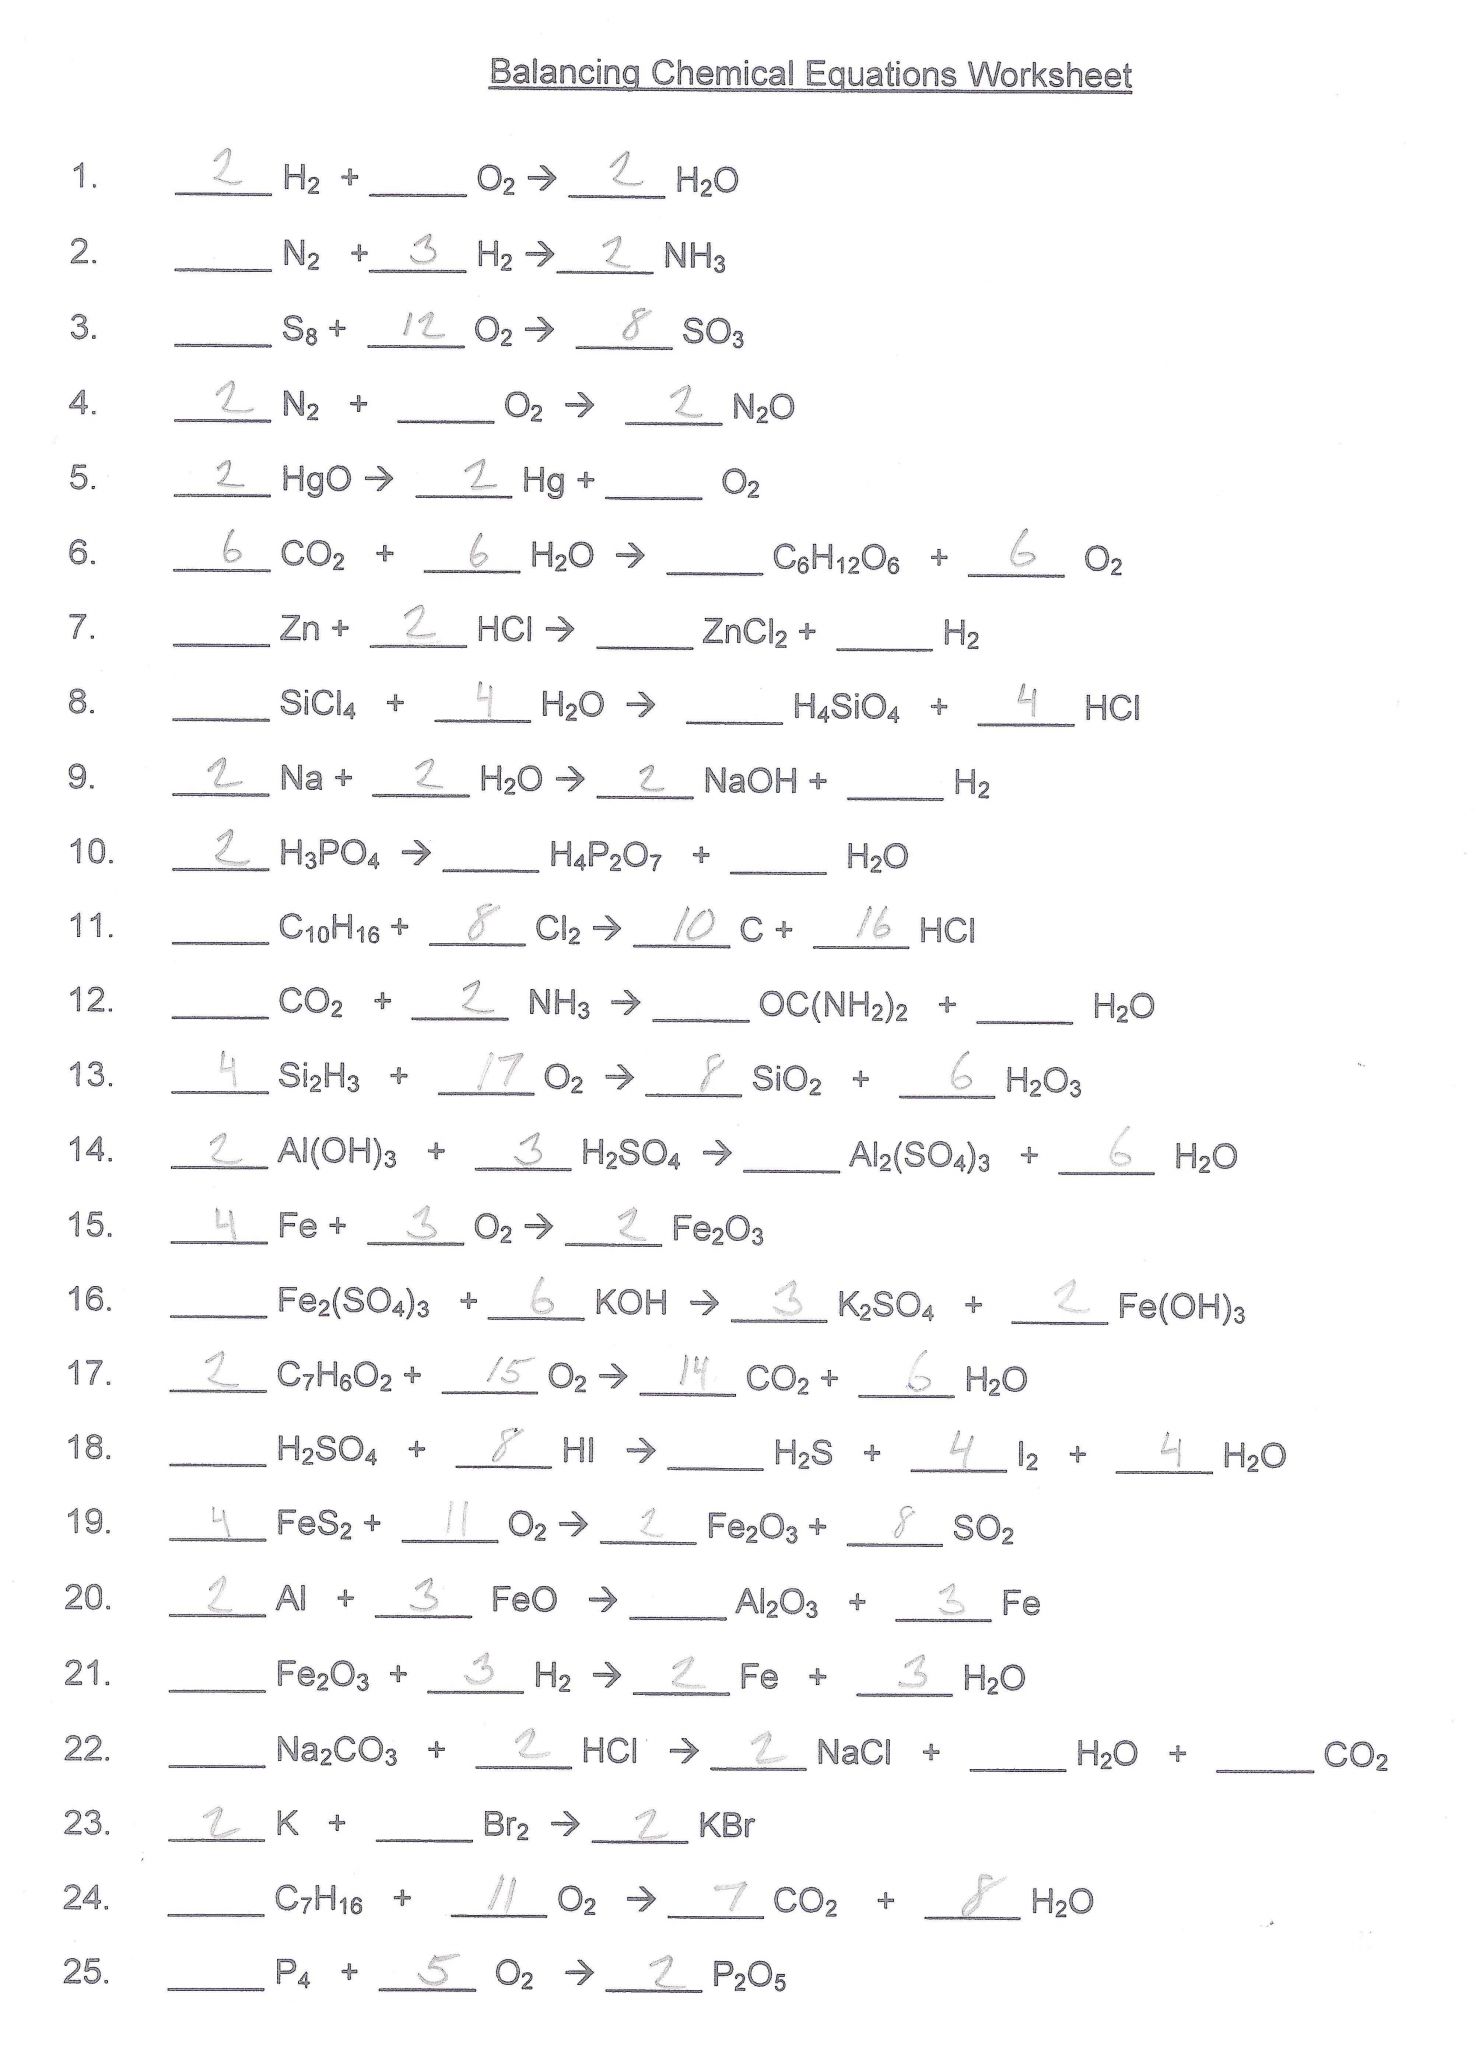 Domain and Range Worksheet Answers together with 16 Unique Domain and Range Worksheet 2 Answer Key